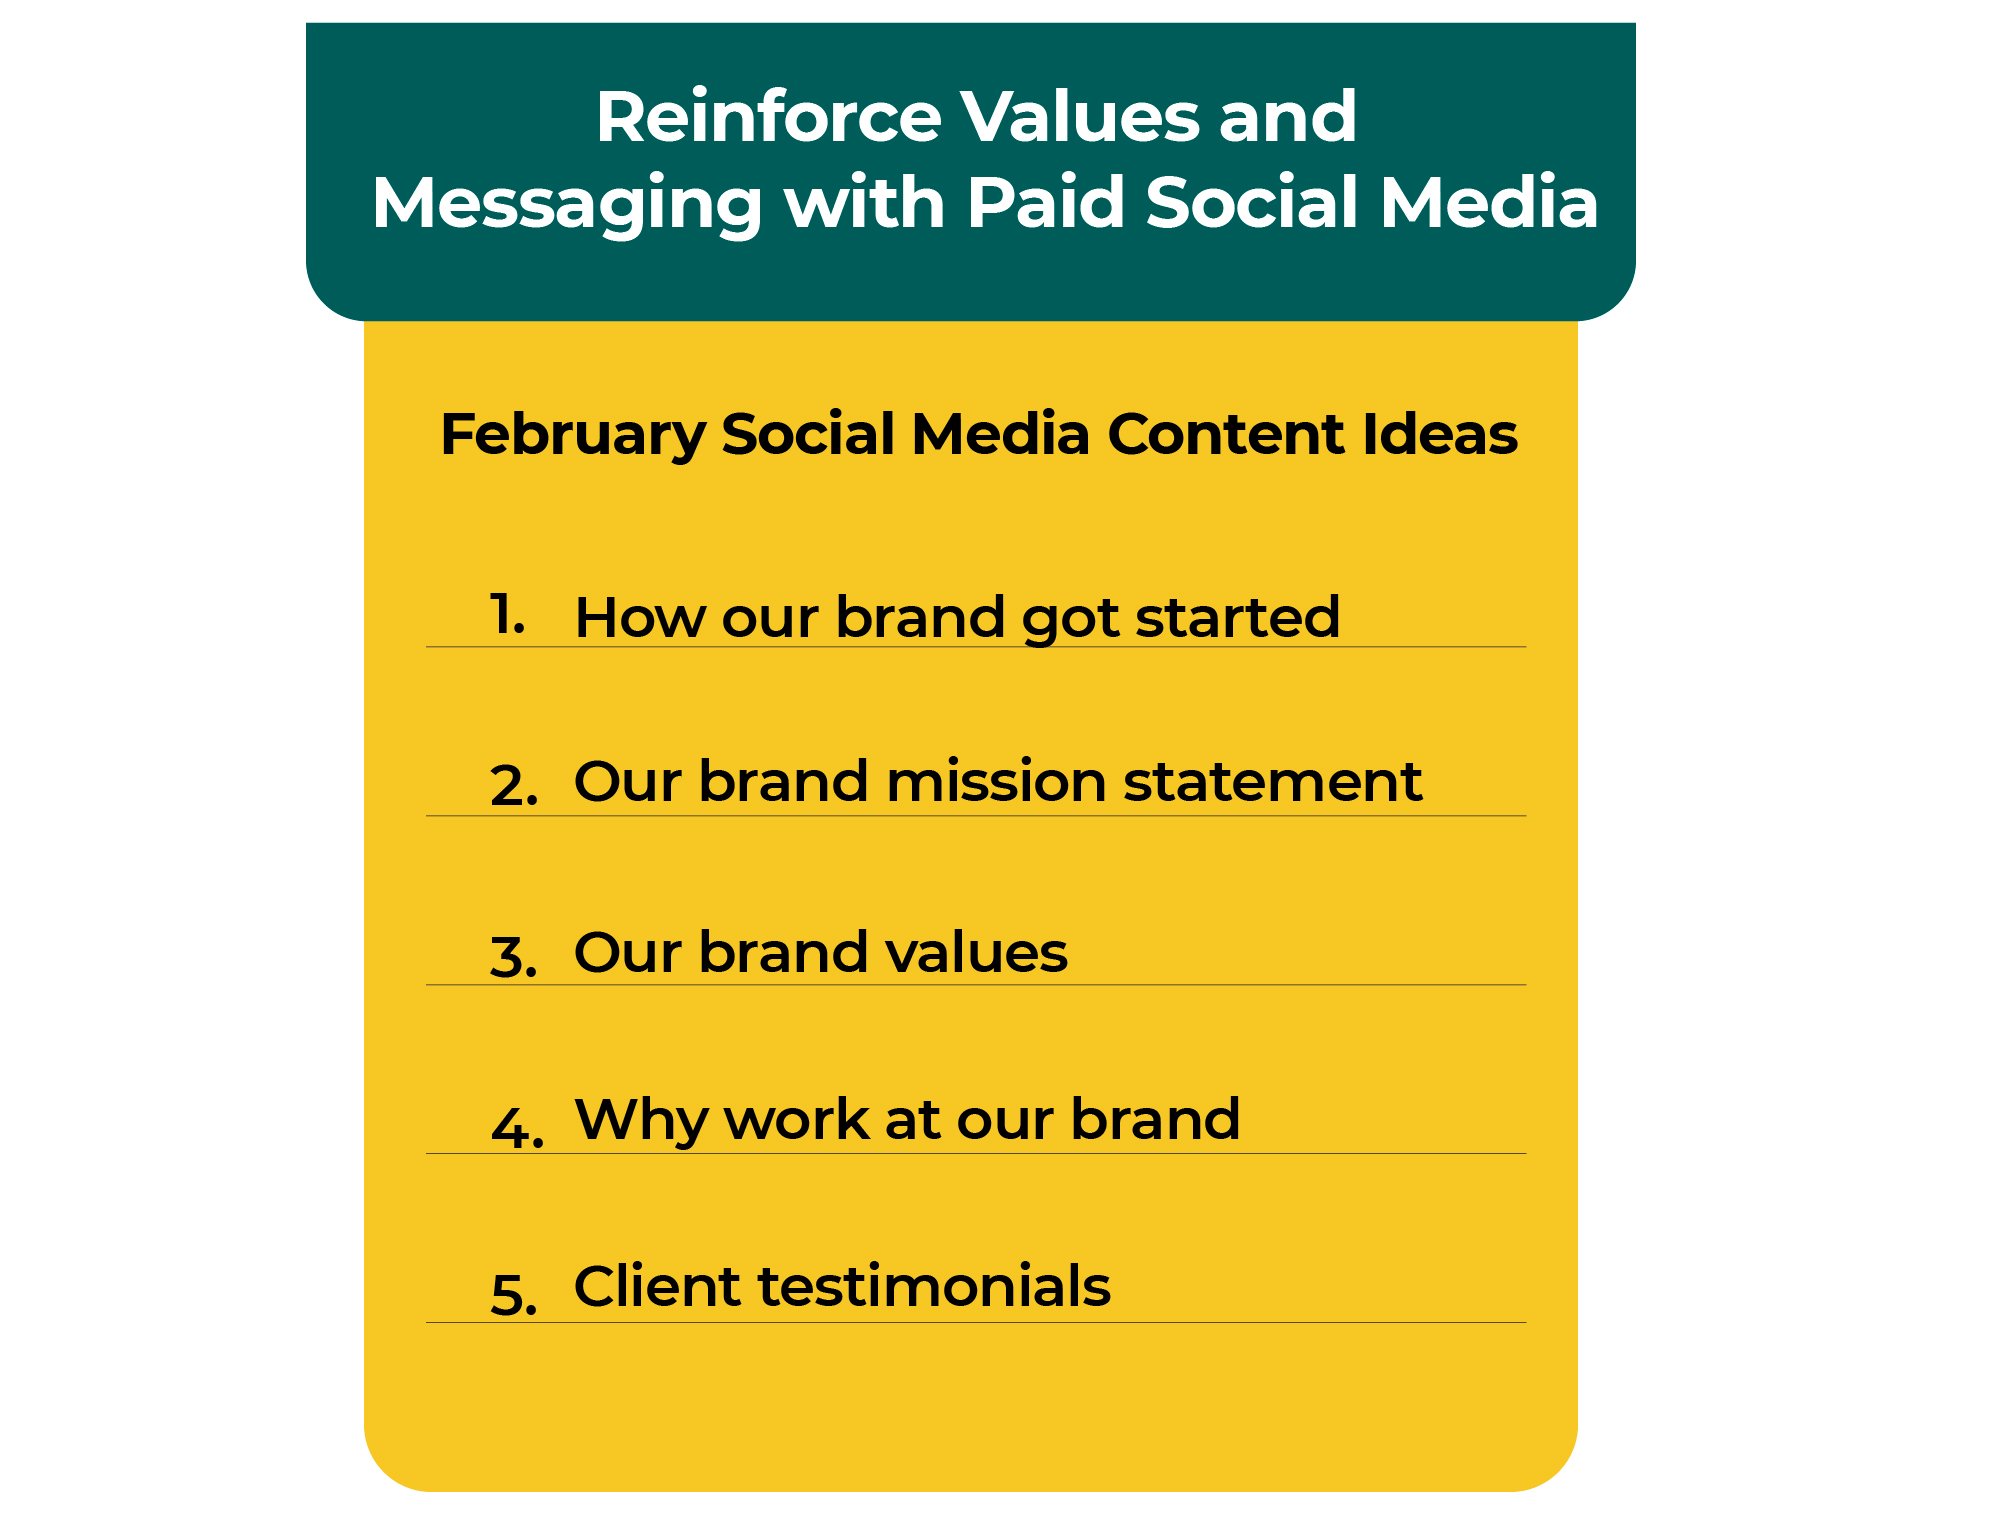 reinforce-company-values-with-social-media